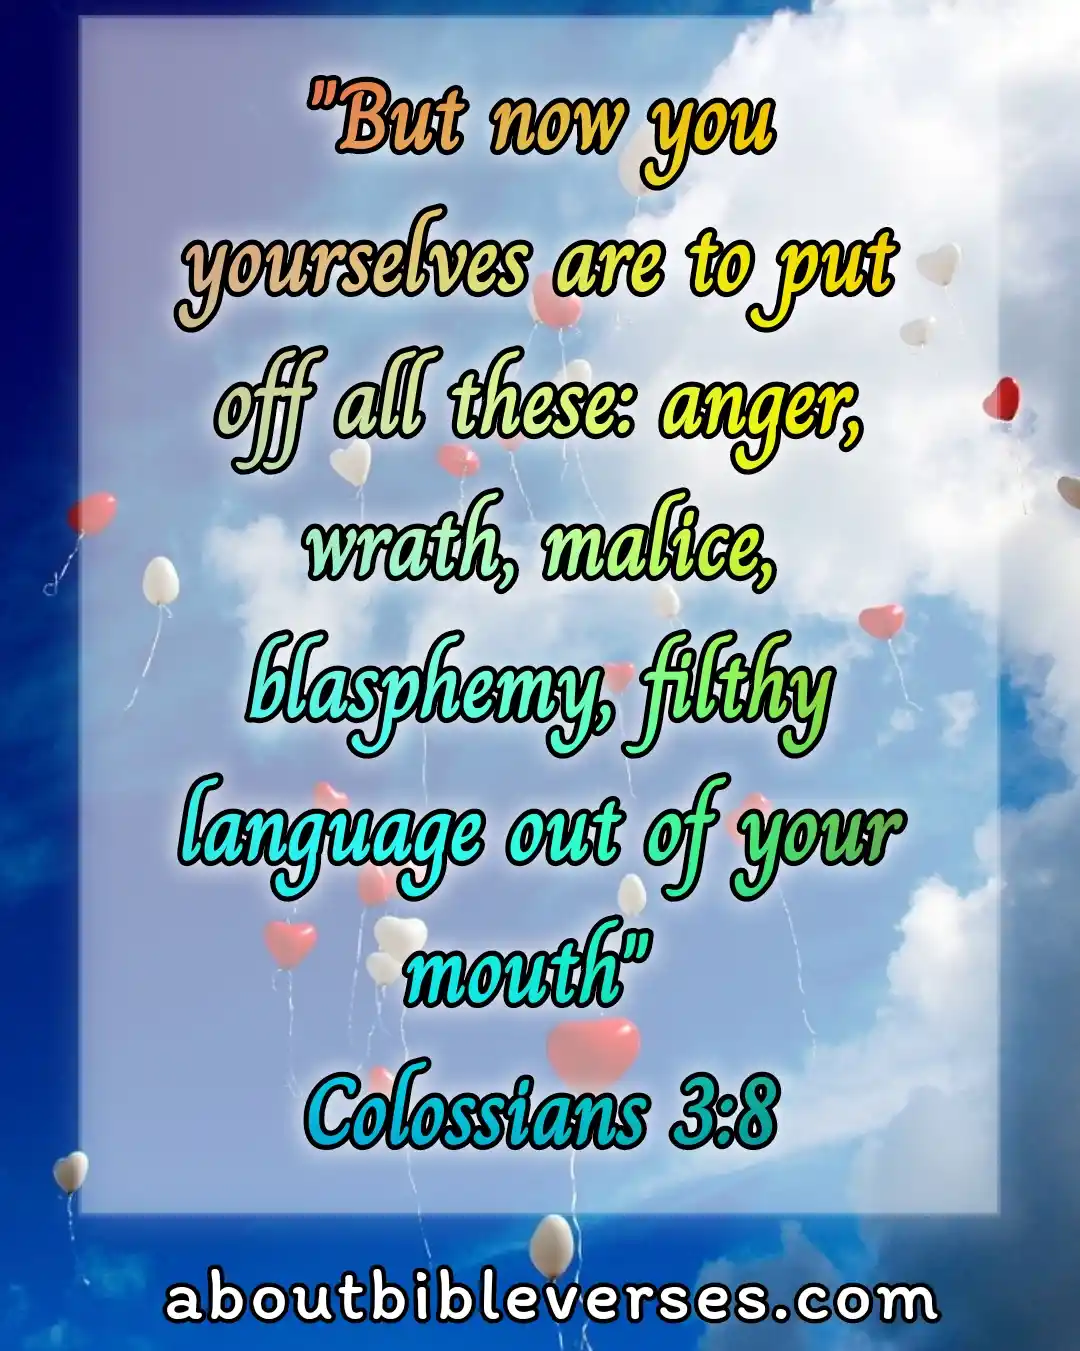 Bible Verses About Gossip And Slander (Colossians 3:8)